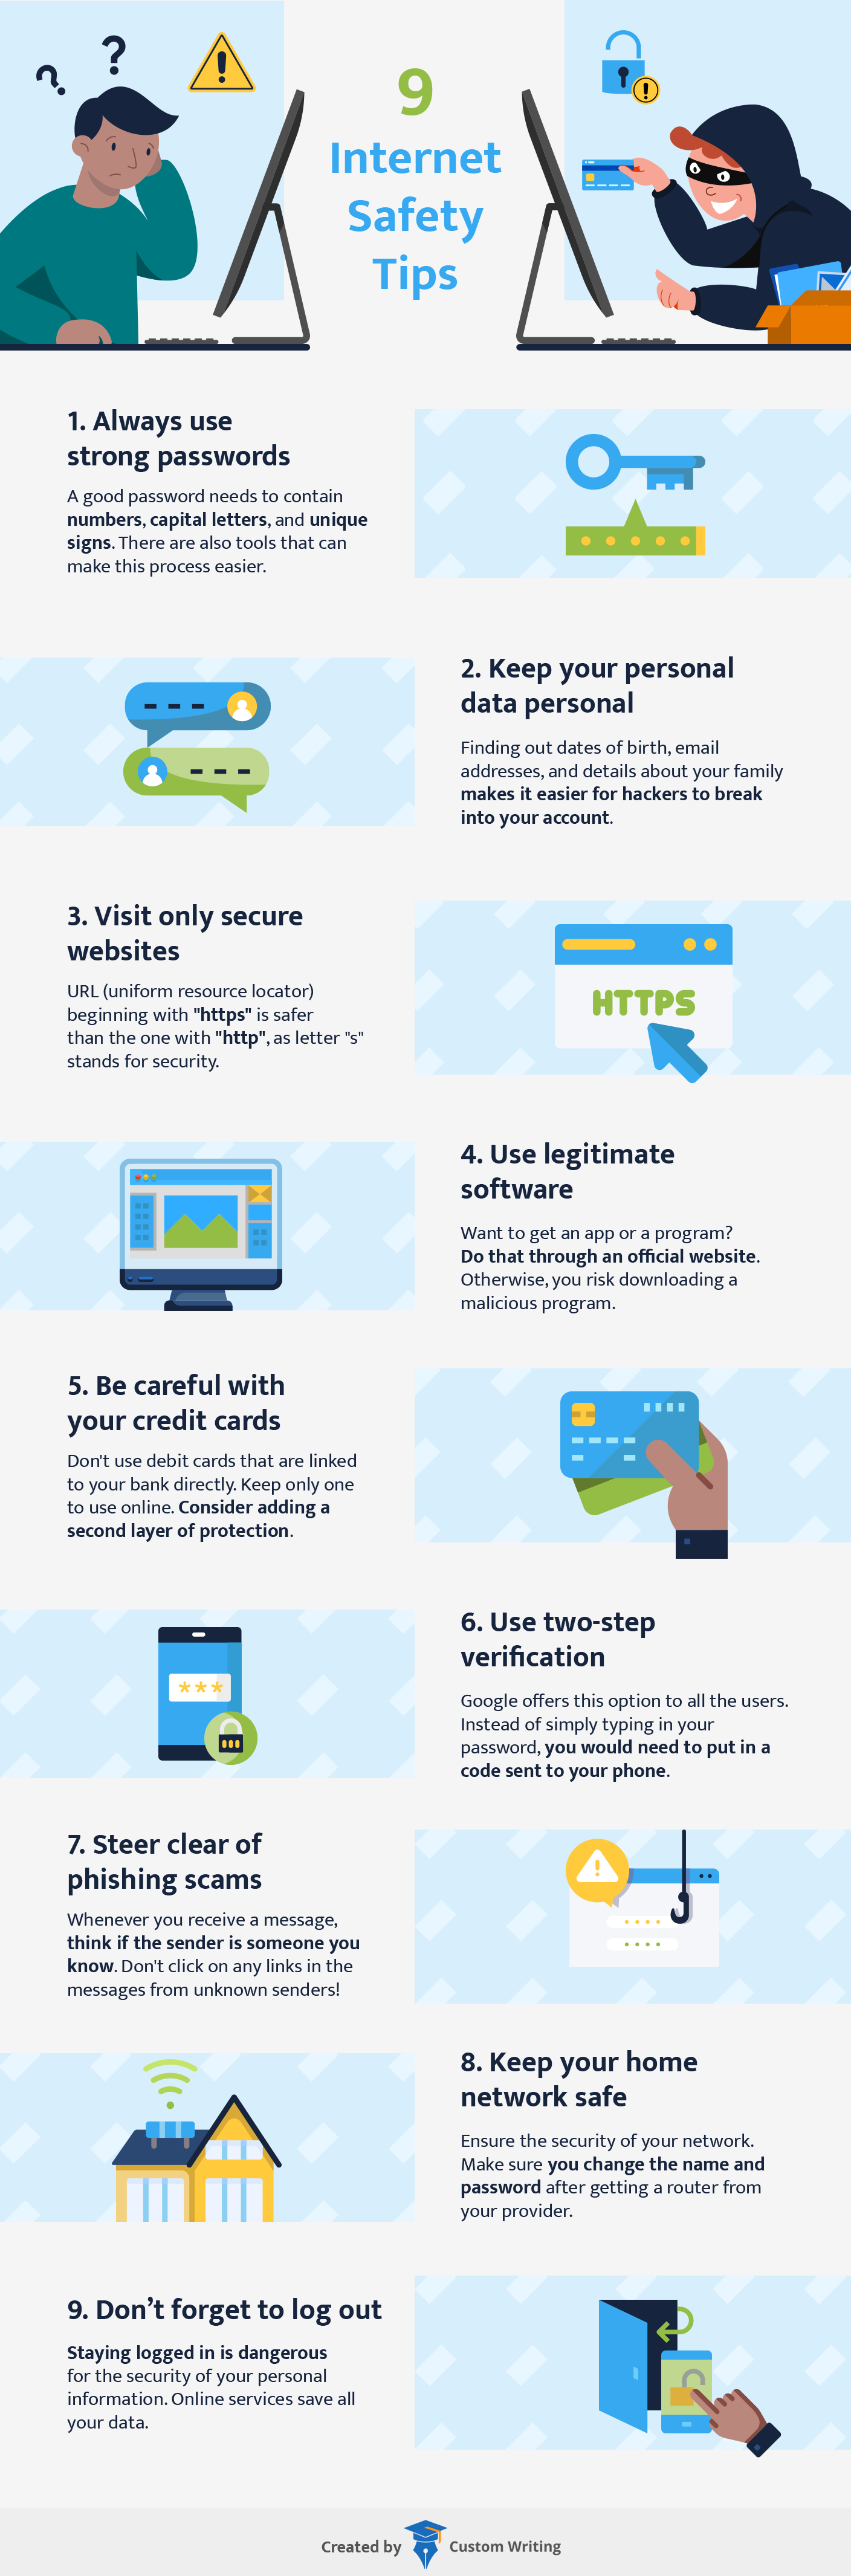 Staying Safe Online 6 Cybersecurity Threats 9 Internet Safety Tips And 1 Infographic 5434